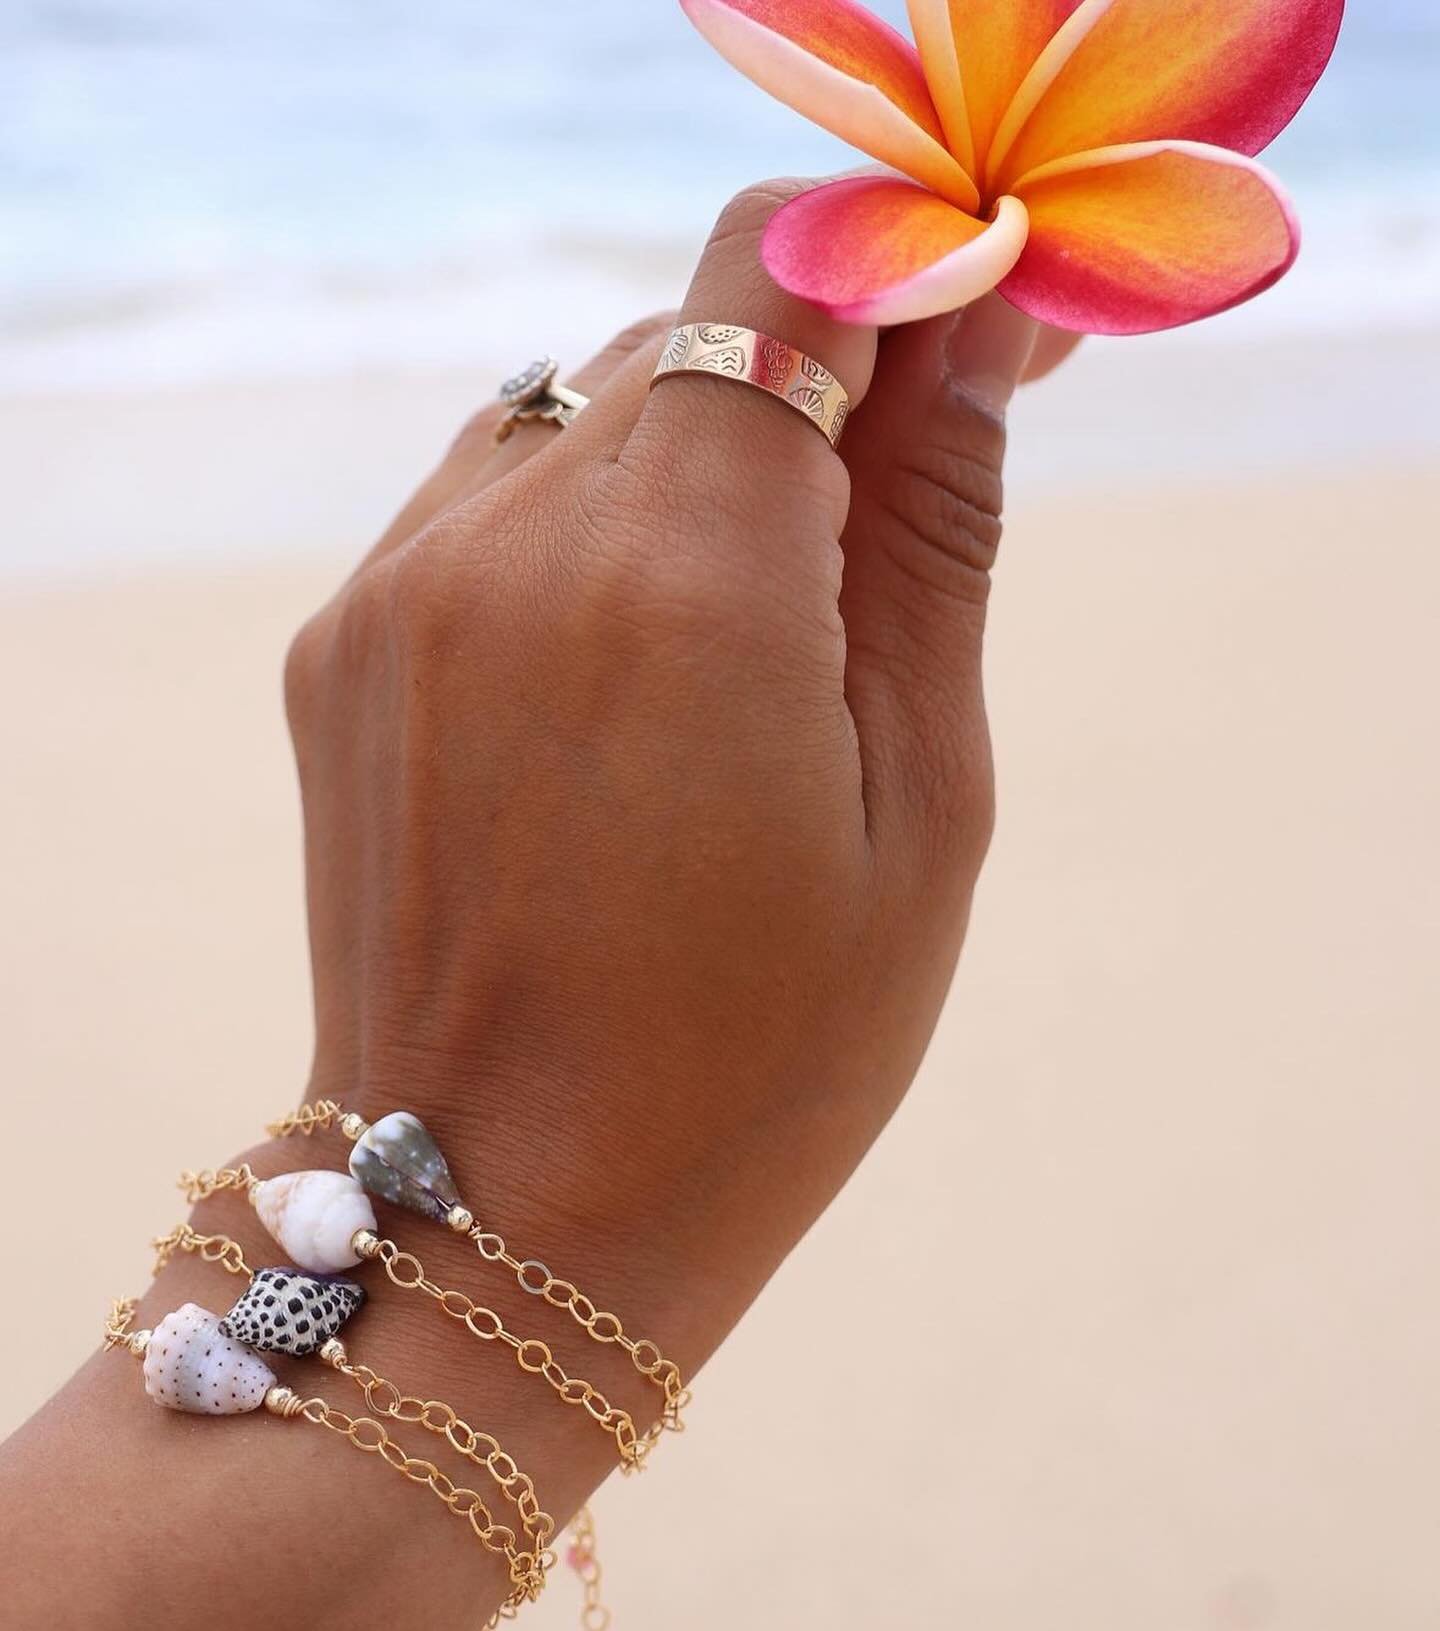 Find your treasure at @treasurehawaii! 🐚✨

With classic, beautiful pieces made with hand collected shells, @treasurehawaii jewelry is designed to elevate any look. 

Explore Angel&rsquo;s one-of-a-kind pop-up this Saturday at our Haleiwa Market! 📆?